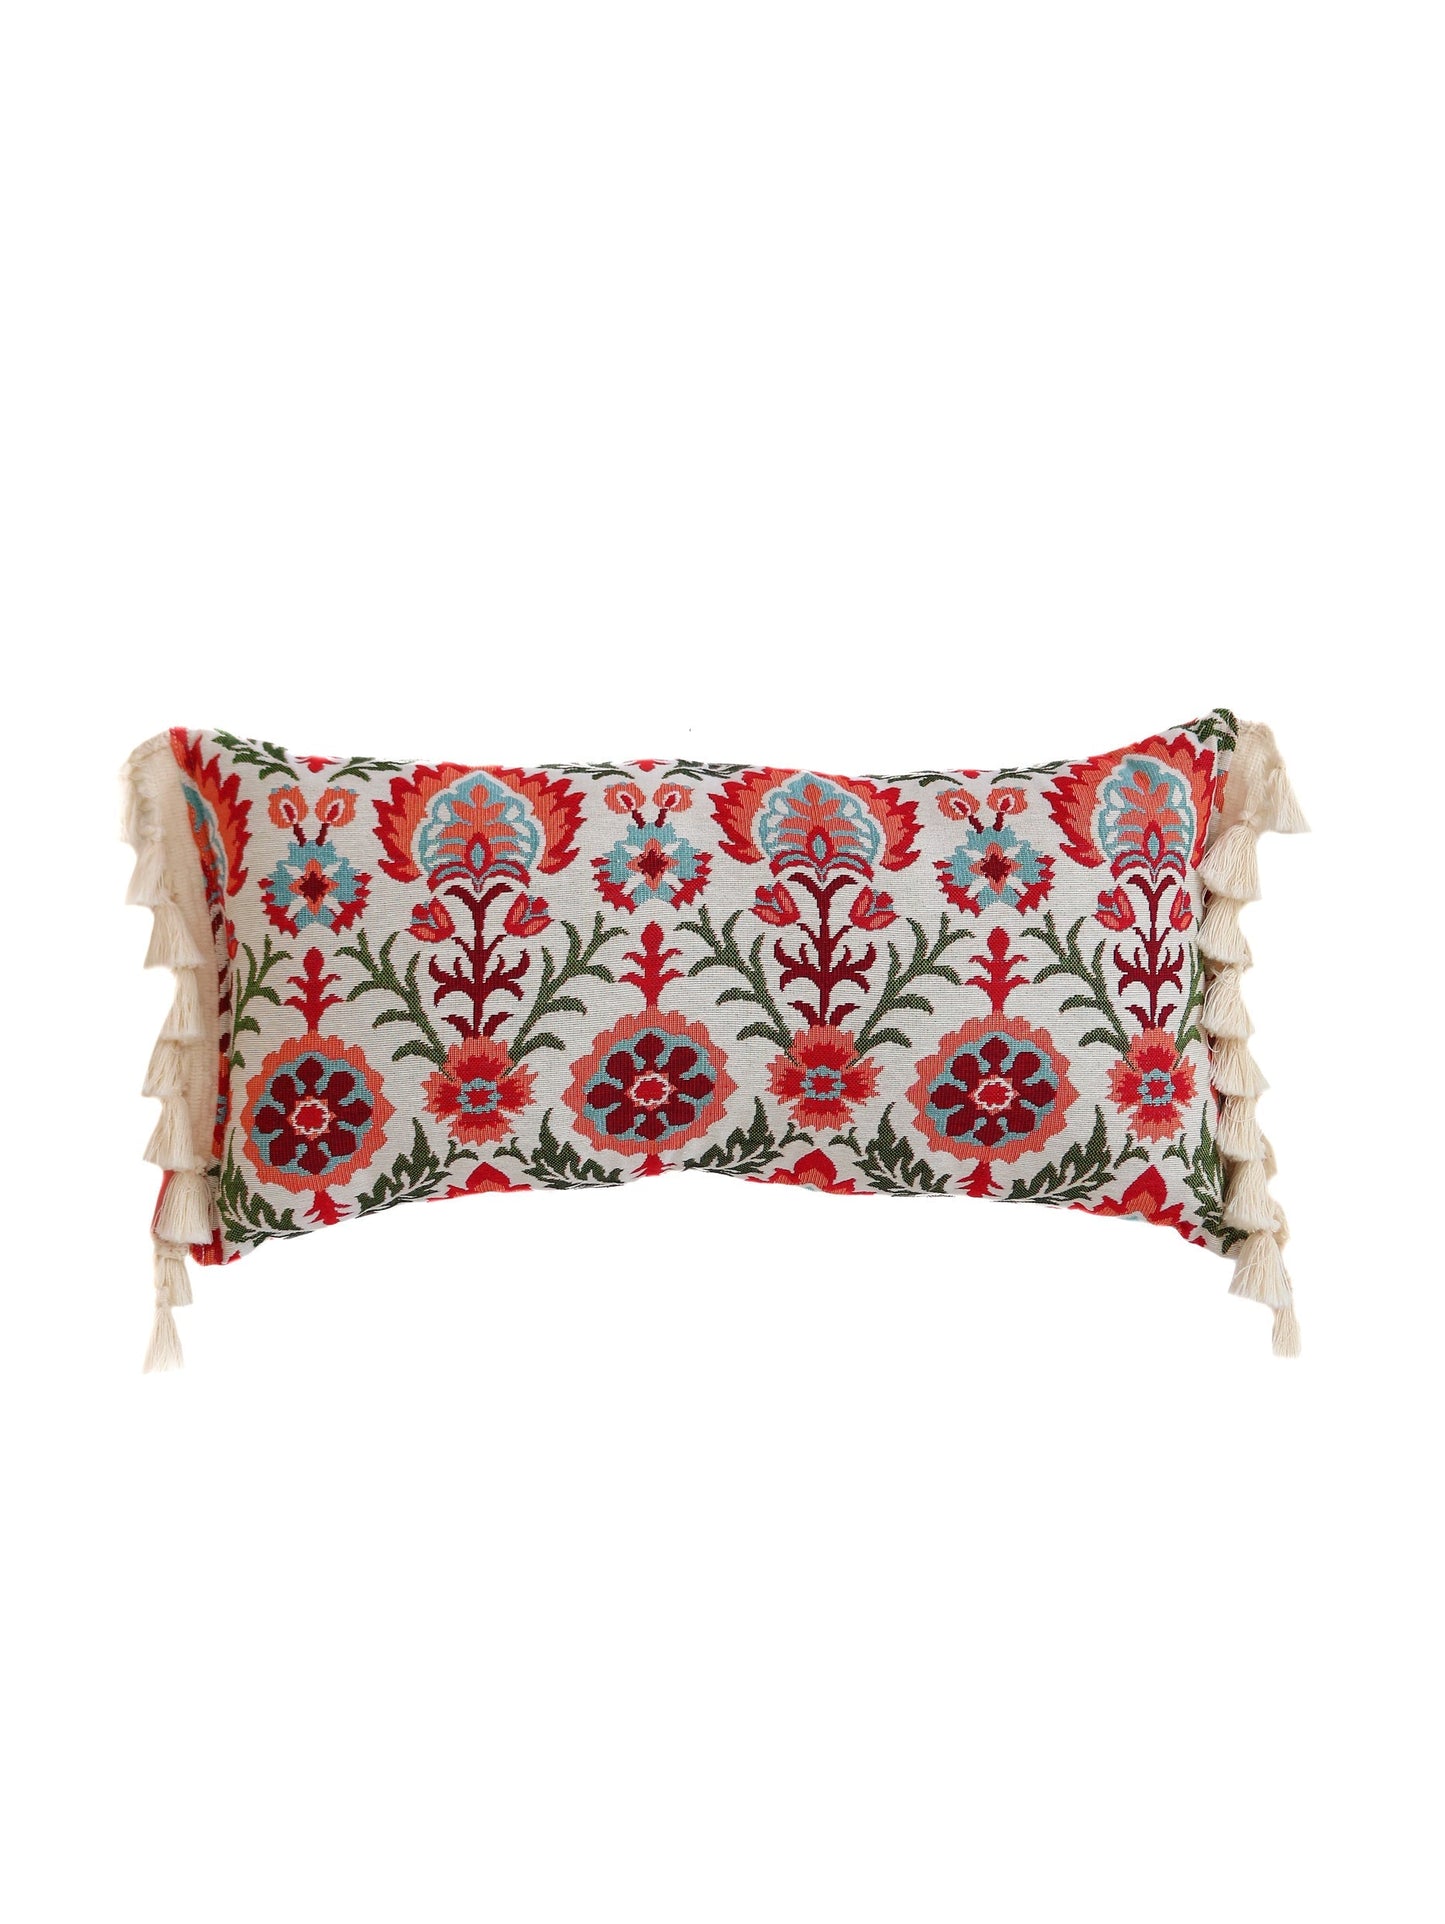 "Scarlet Iris in Cancaya" Bolster Pillow with Fringe